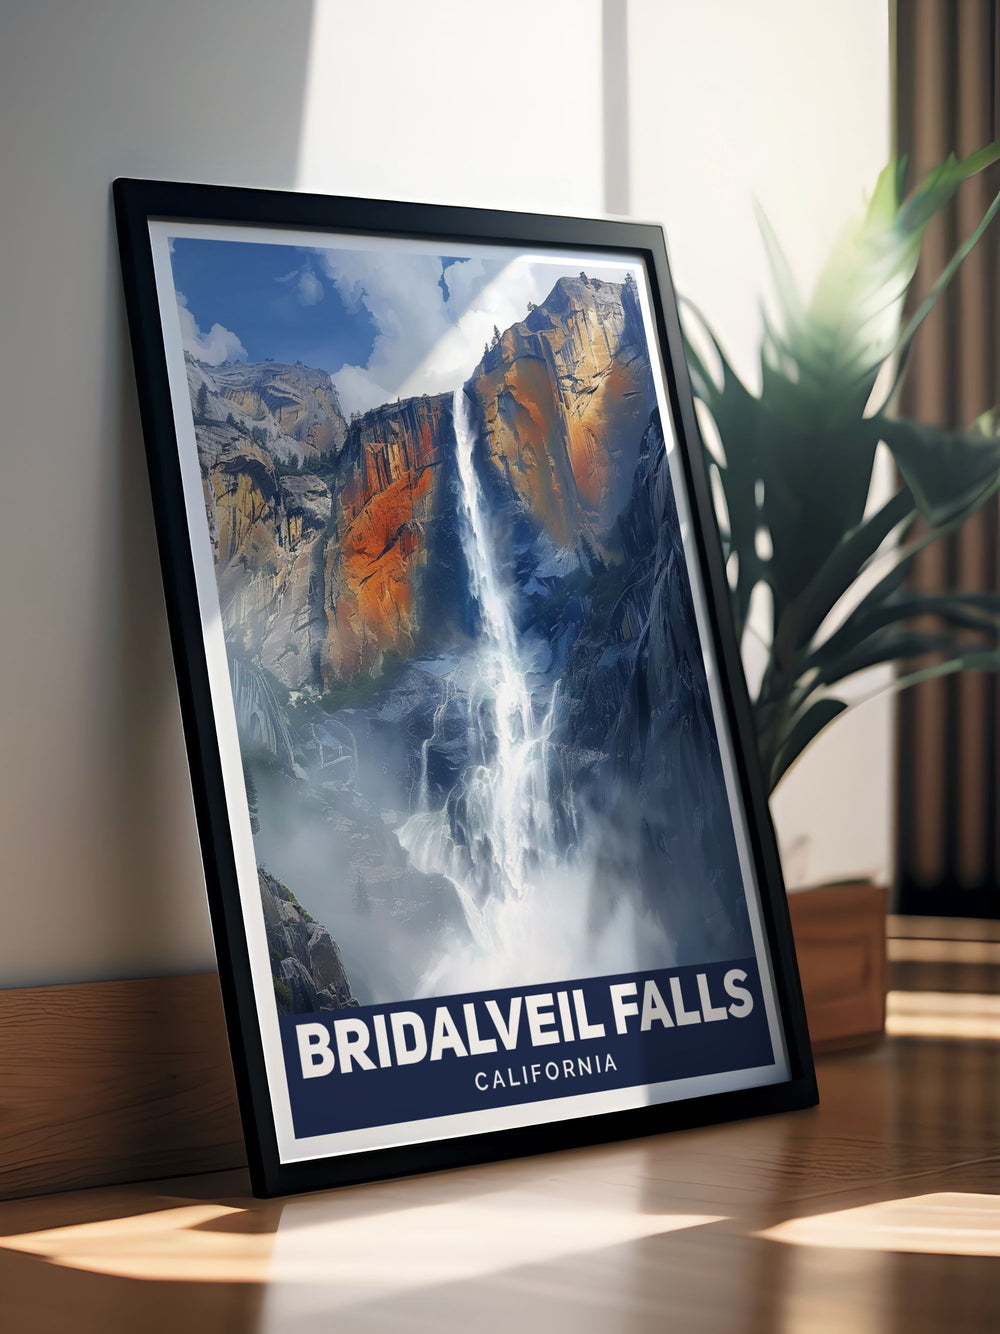 Closeup view of the majestic Bridalveil Falls showcasing the intricate details of the waterfall and lush surroundings ideal for those seeking California artwork that brings the essence of nature into their home decor. A perfect California travel poster for any wall.